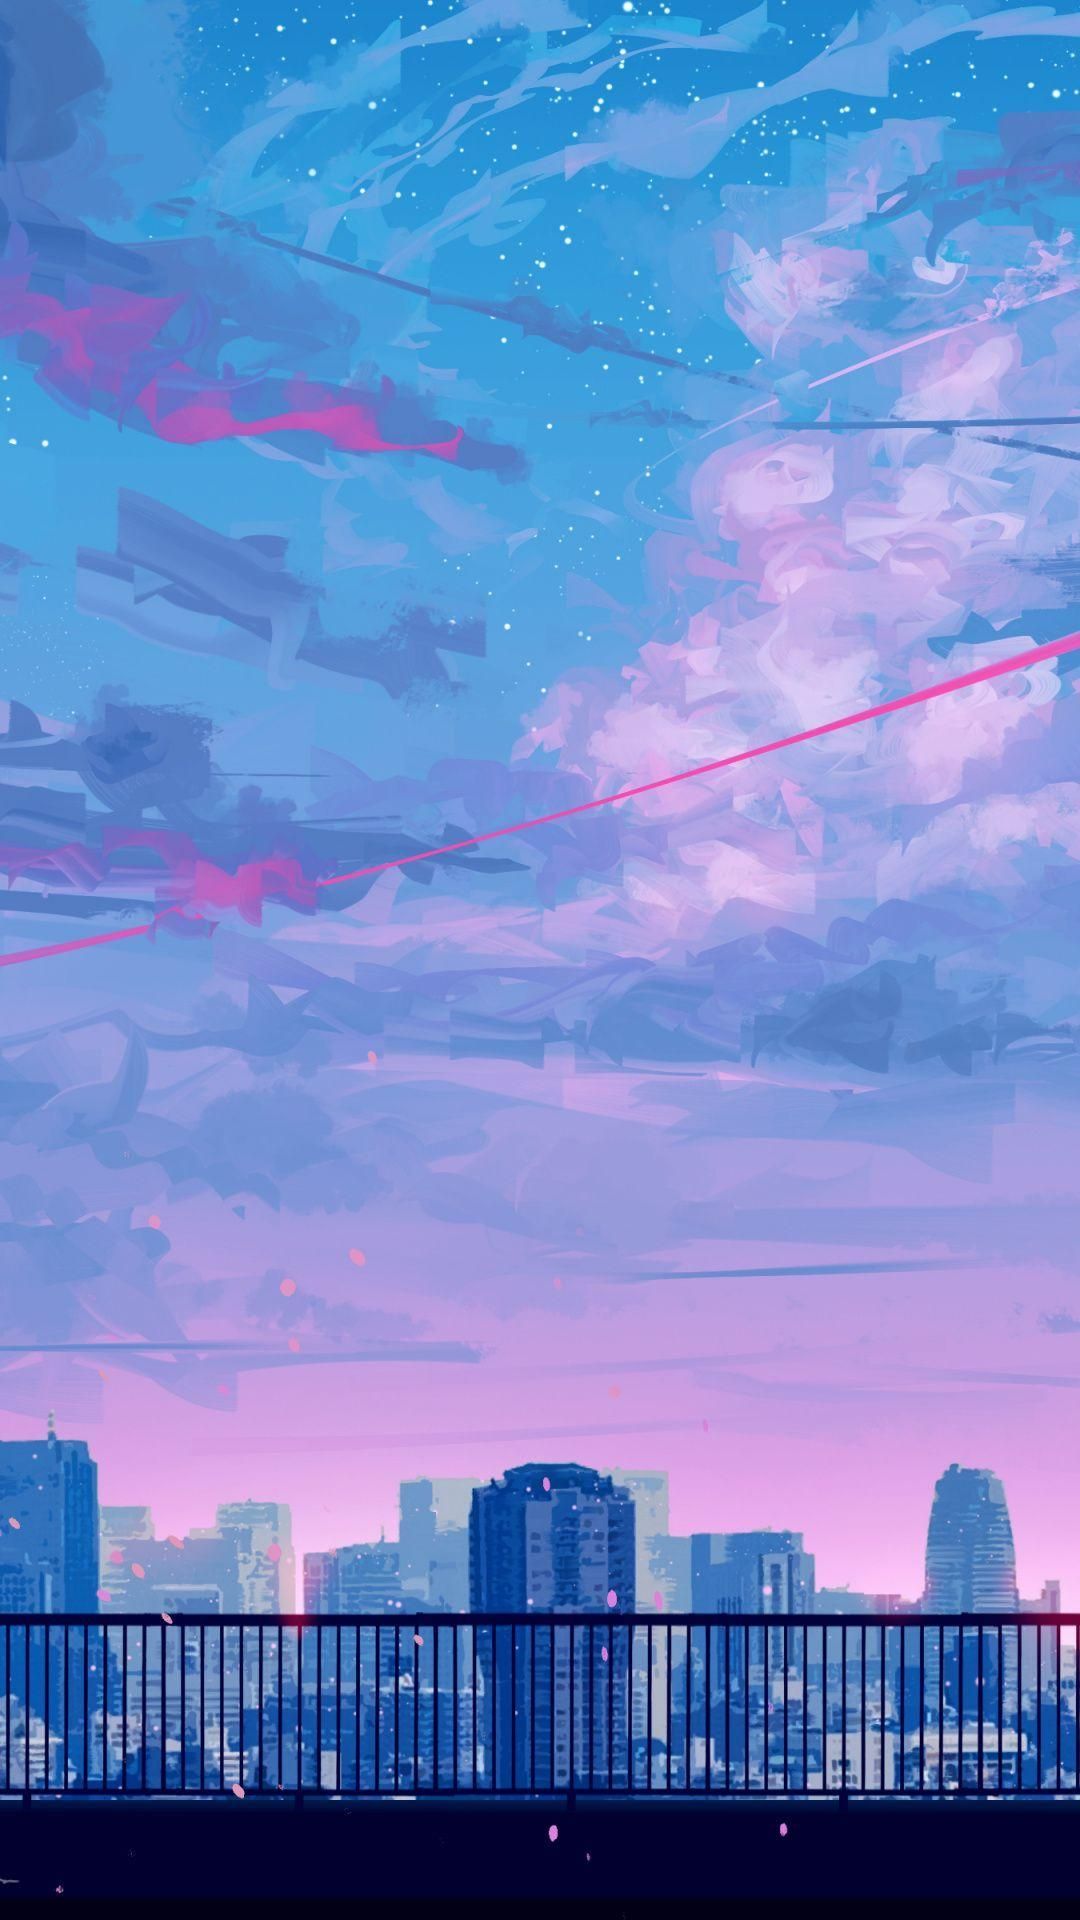 Aesthetic Pink And Blue Background Picture. Scenery wallpaper, Anime scenery, Anime scenery wallpaper